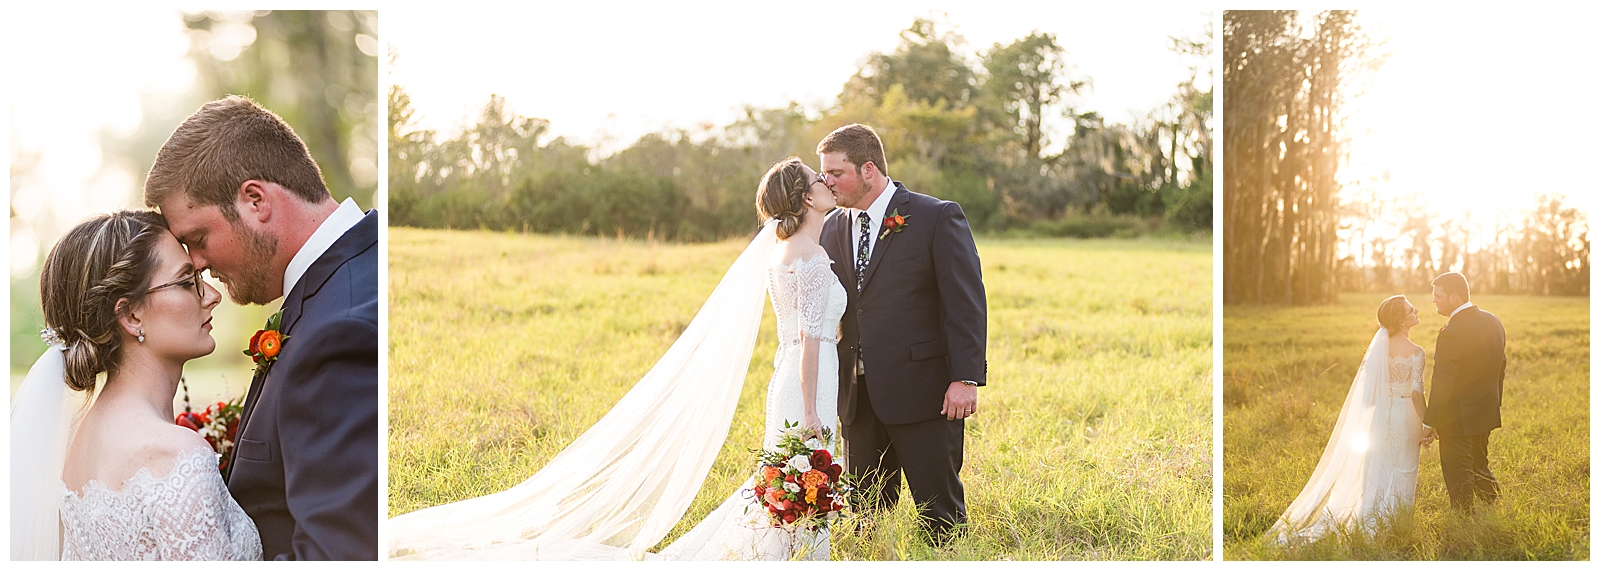 timeless bright and airy tampa wedding photography